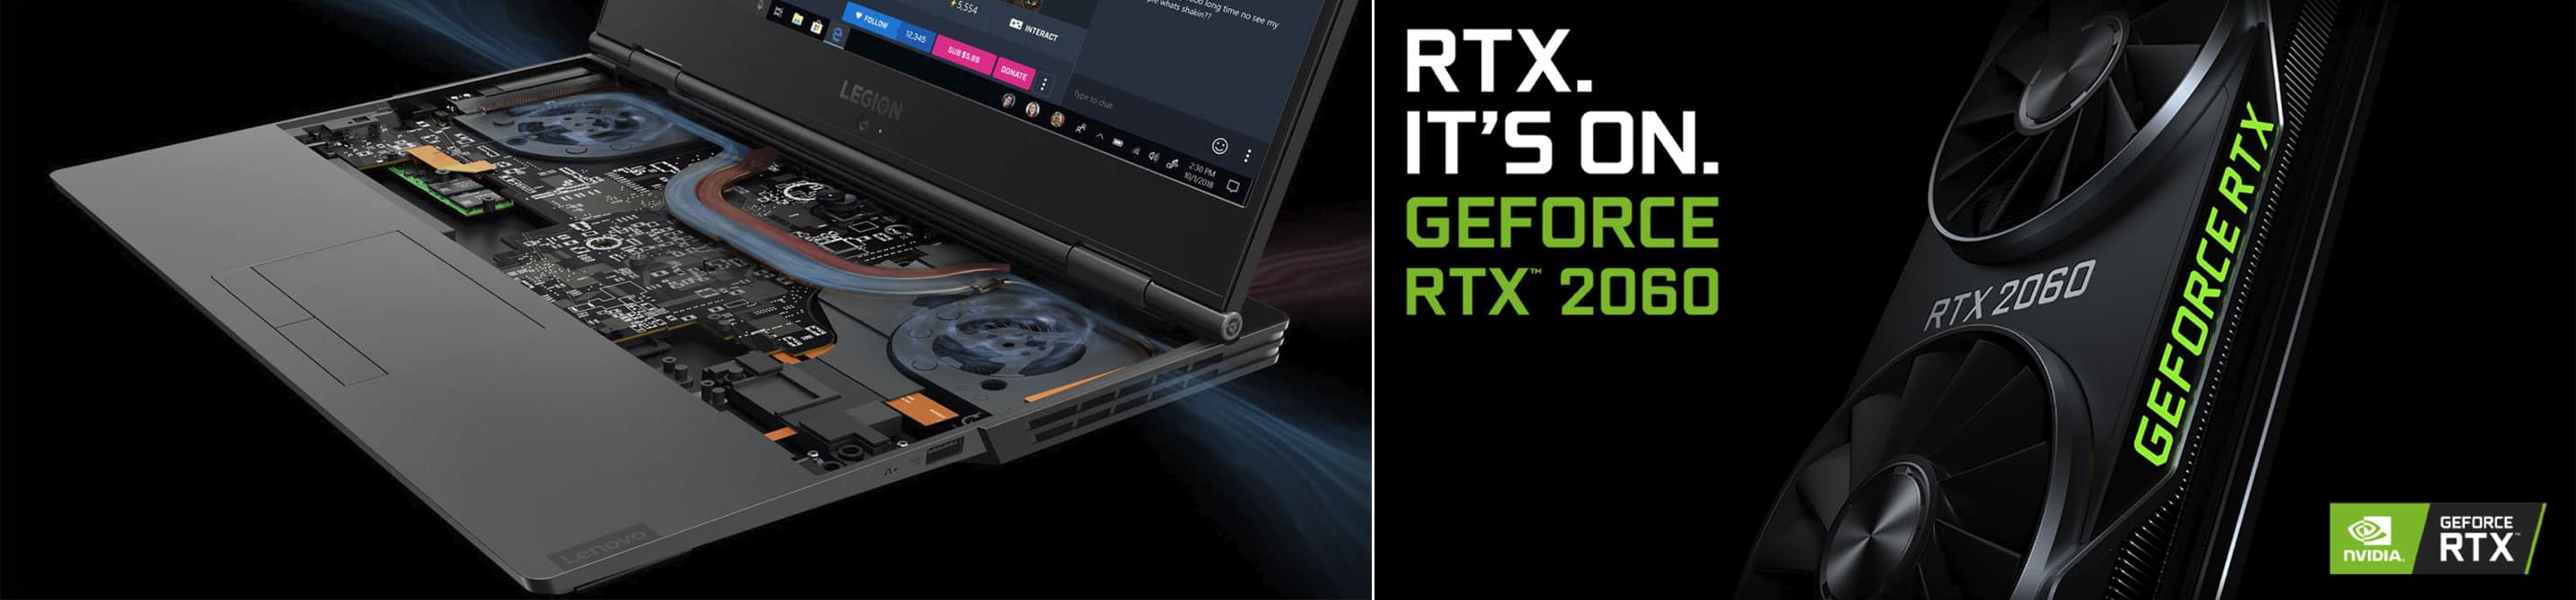 Laptops with Nvidia RTX 2060 graphics 